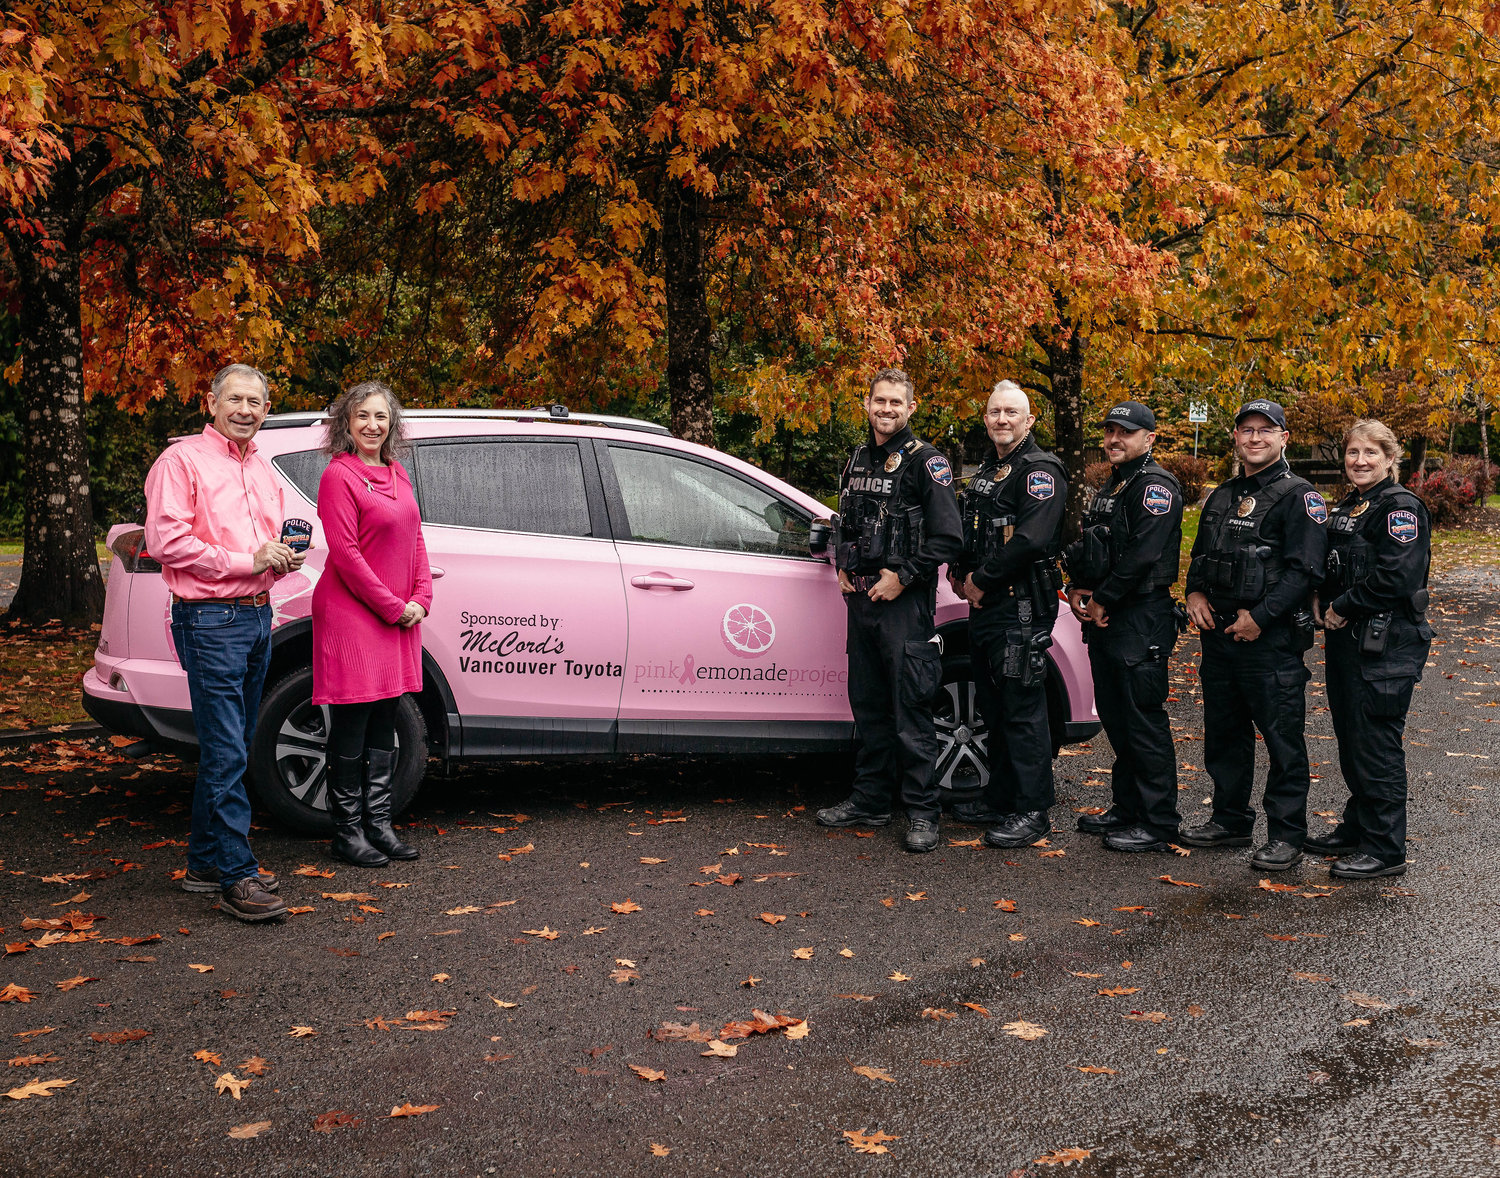 The Battle Ground, Ridgefield, La Center, Washougal and Camas police departments joined over 400 law enforcement agencies across the country for another year of the Pink Patch Project, which raises awareness for the fight against breast cancer.